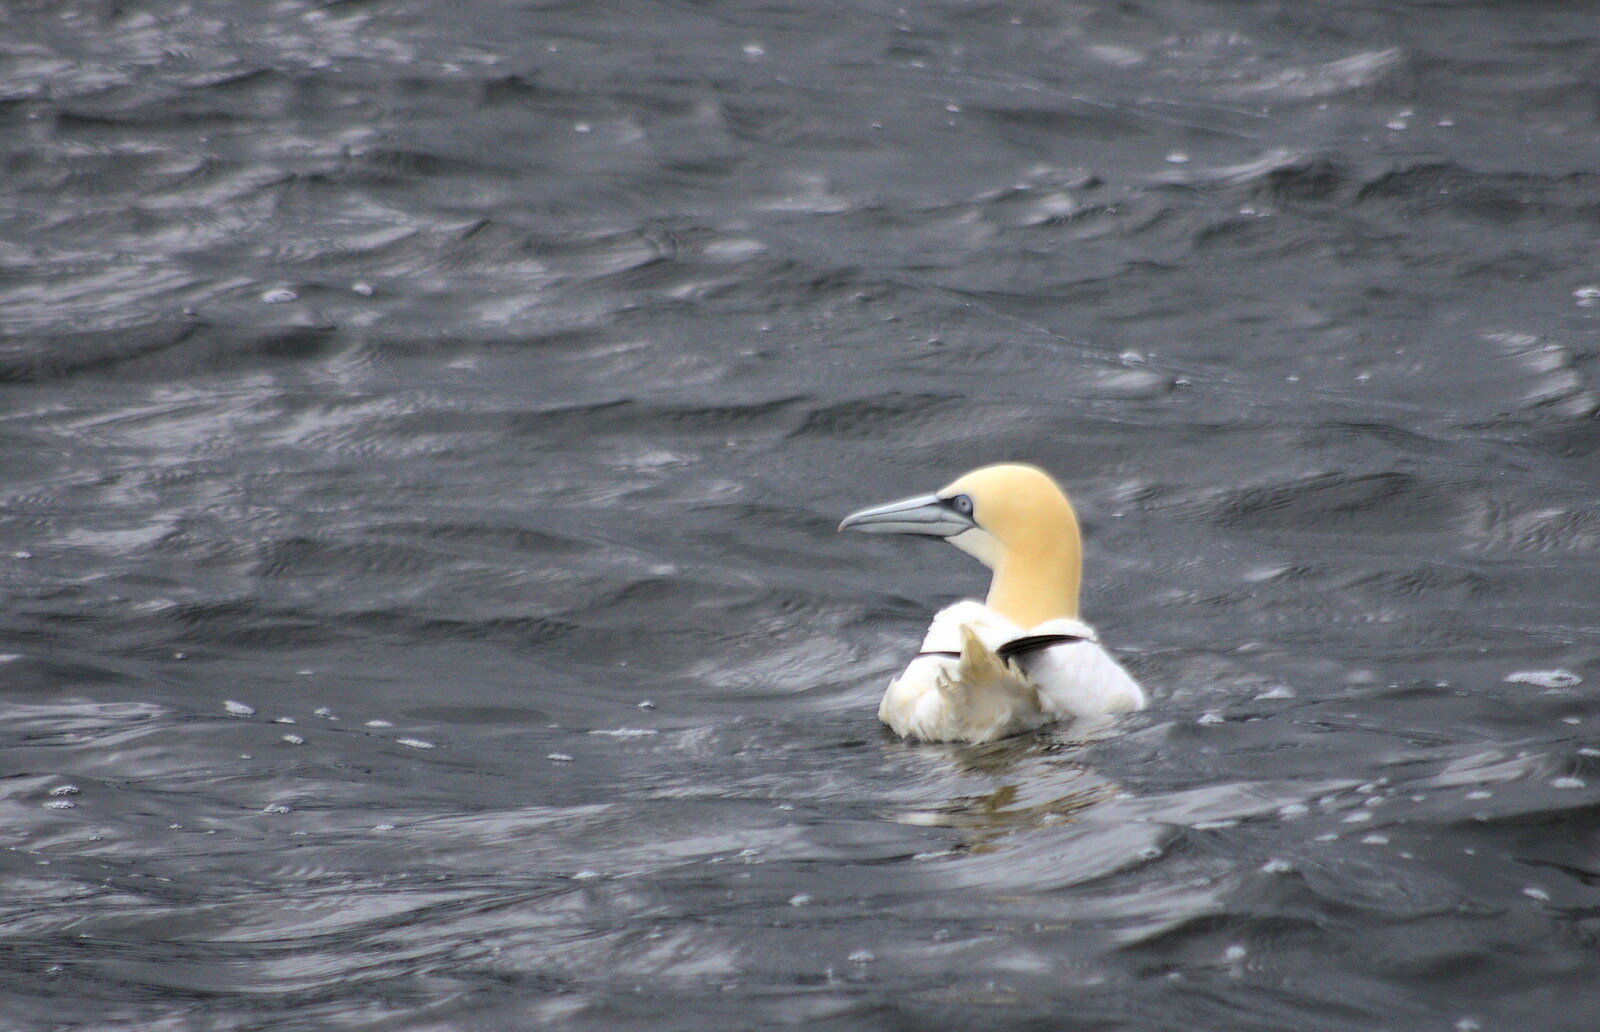 A gannet bobs about from A Seafari Boat Trip, Kenmare, Kerry, Ireland - 3rd August 2017